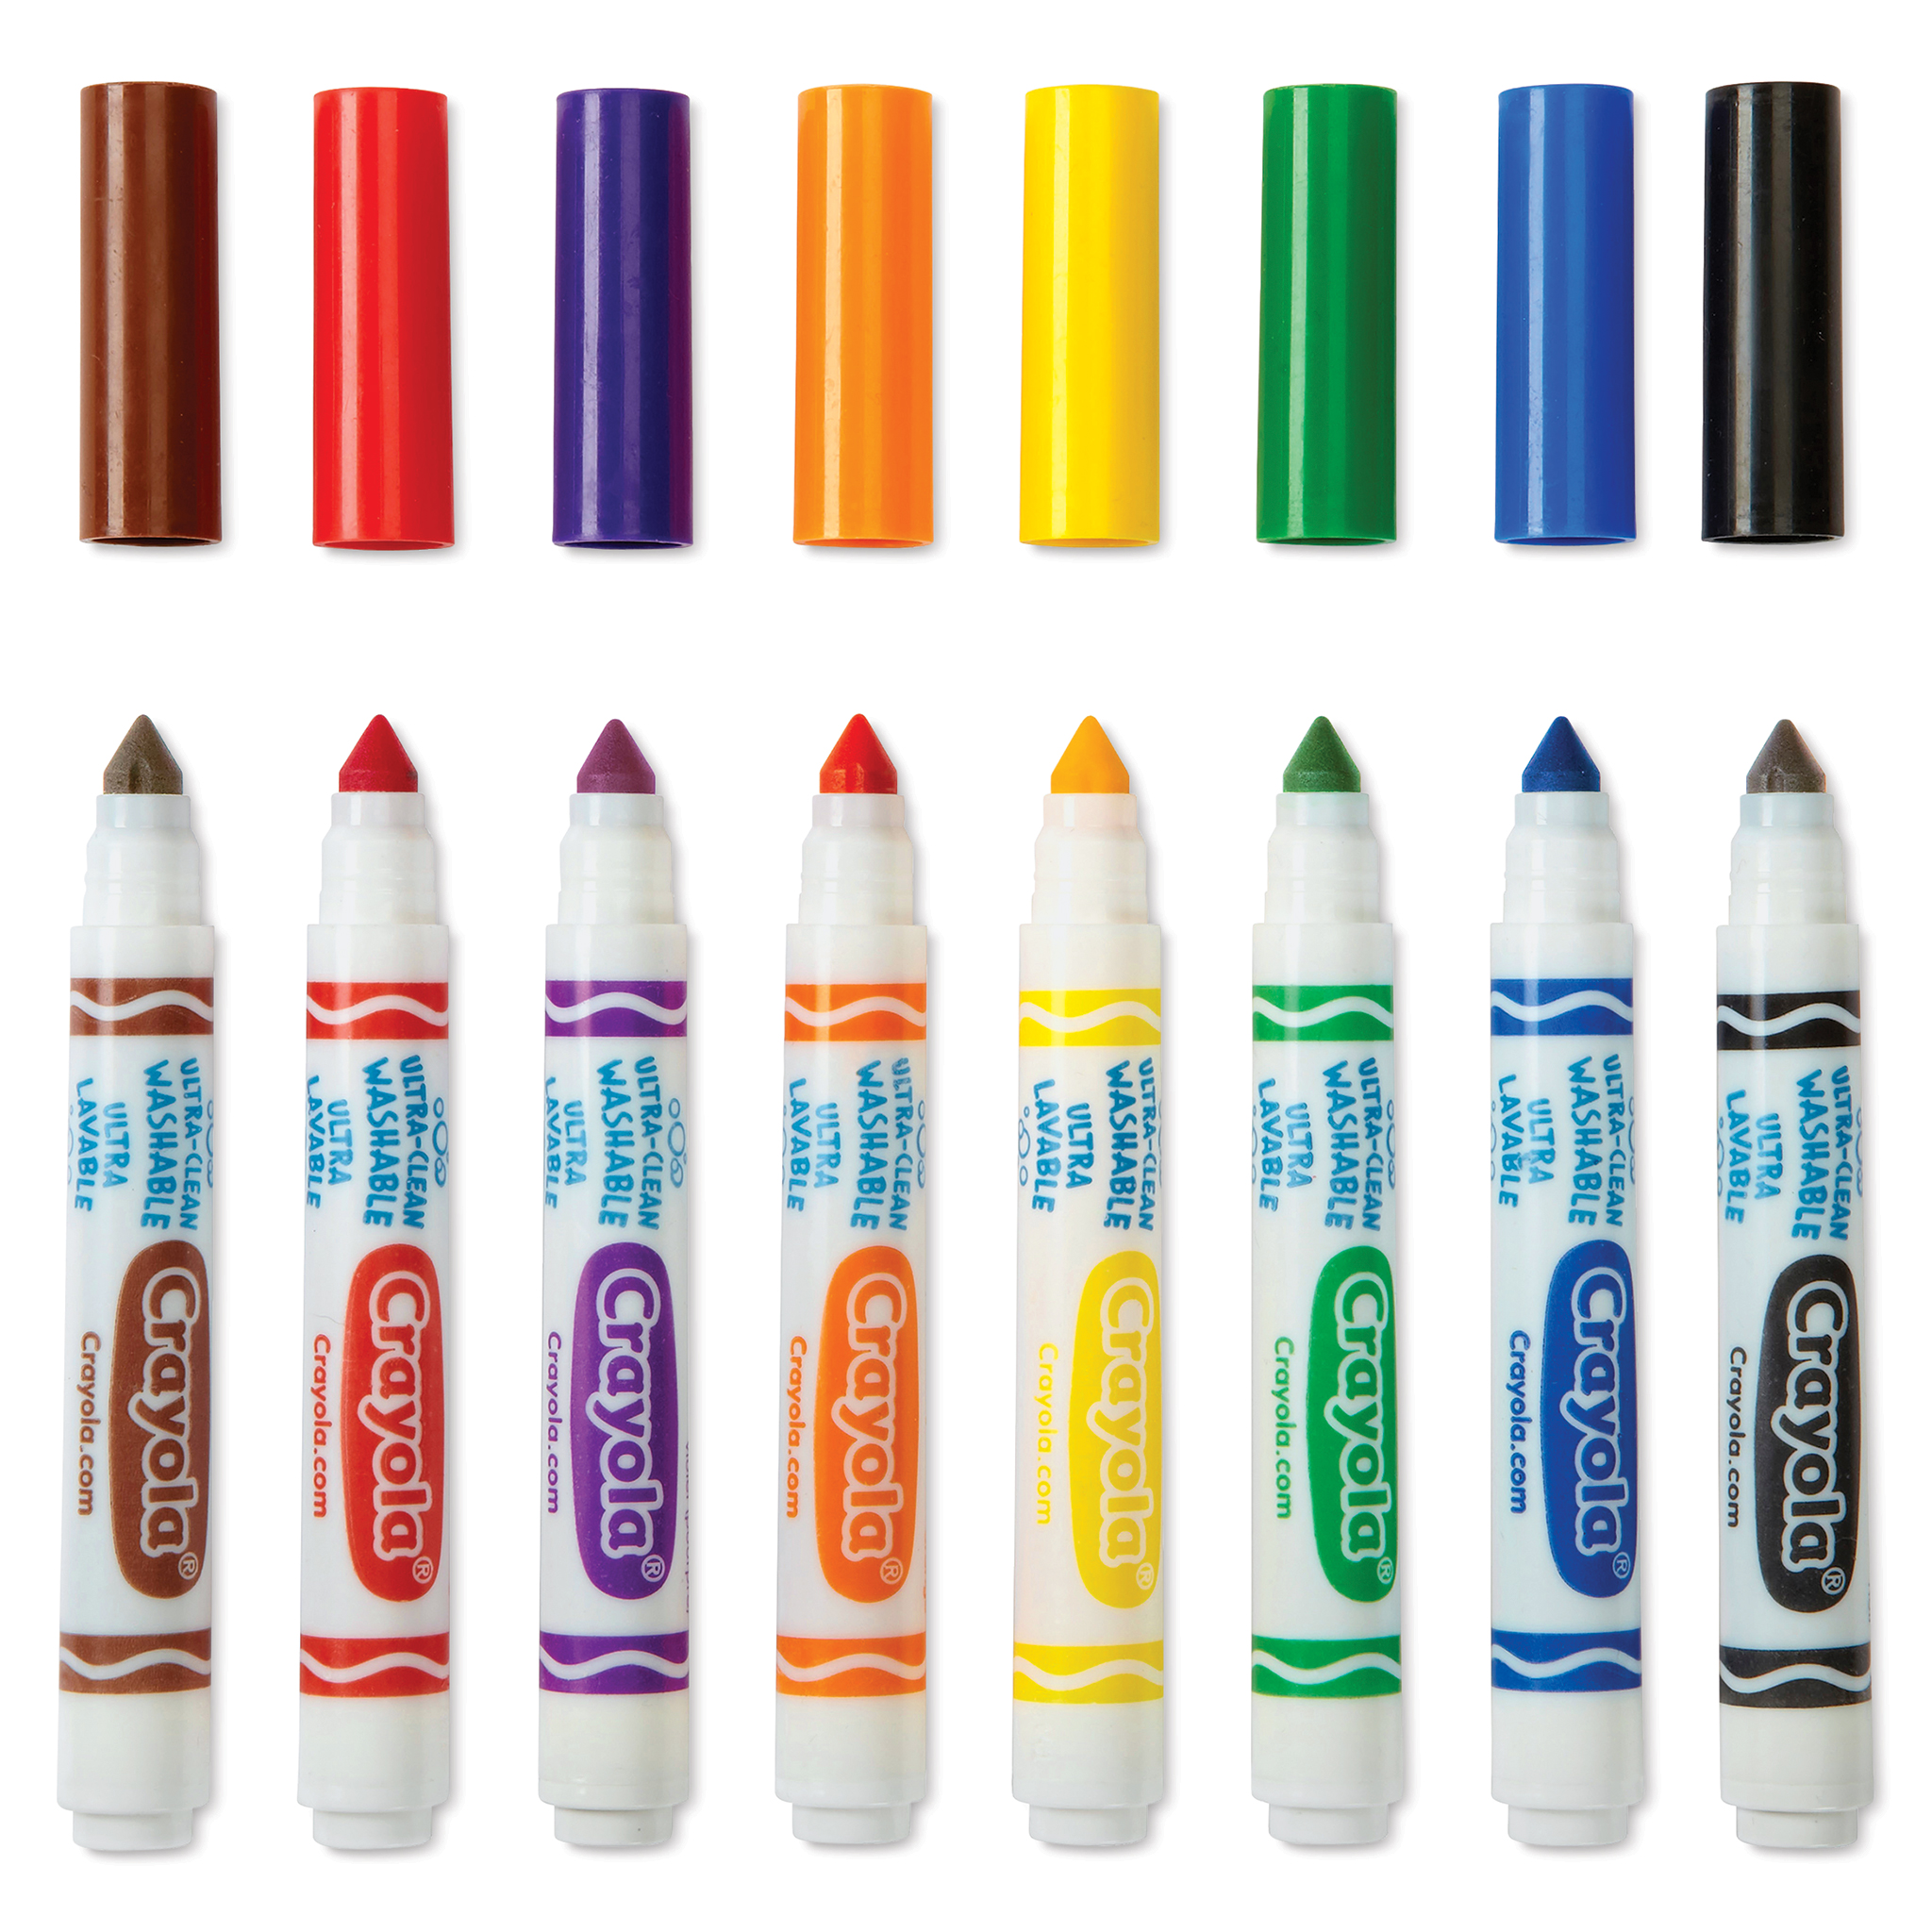  Crayola Ultra Clean Washable Markers Classpack (200